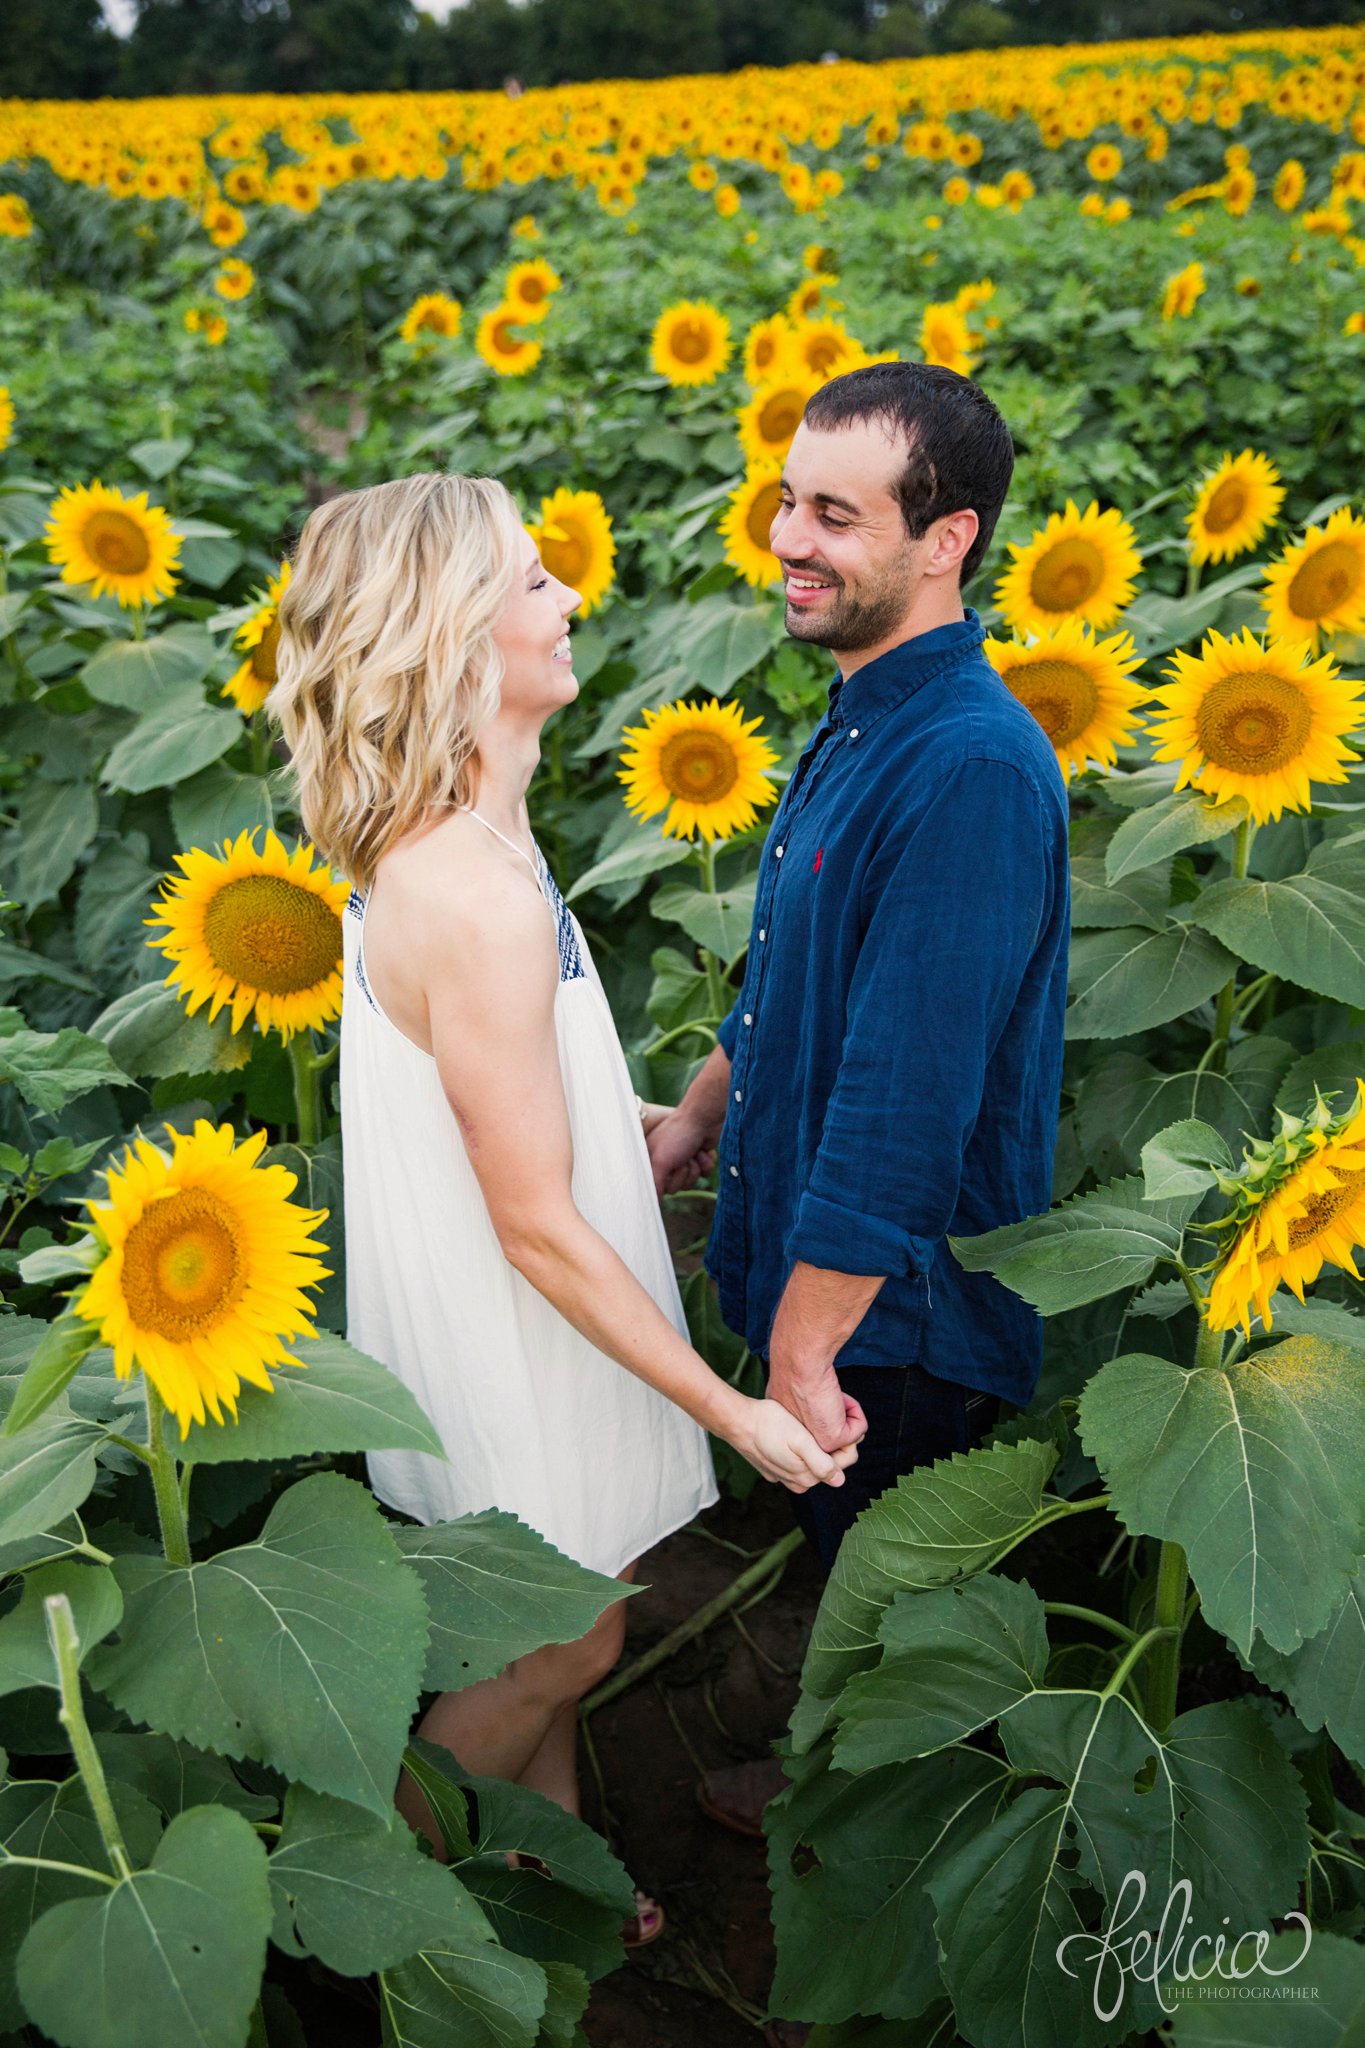 Sunrise Engagement Photos | Felicia The Photographer | Sunflower field | laughing